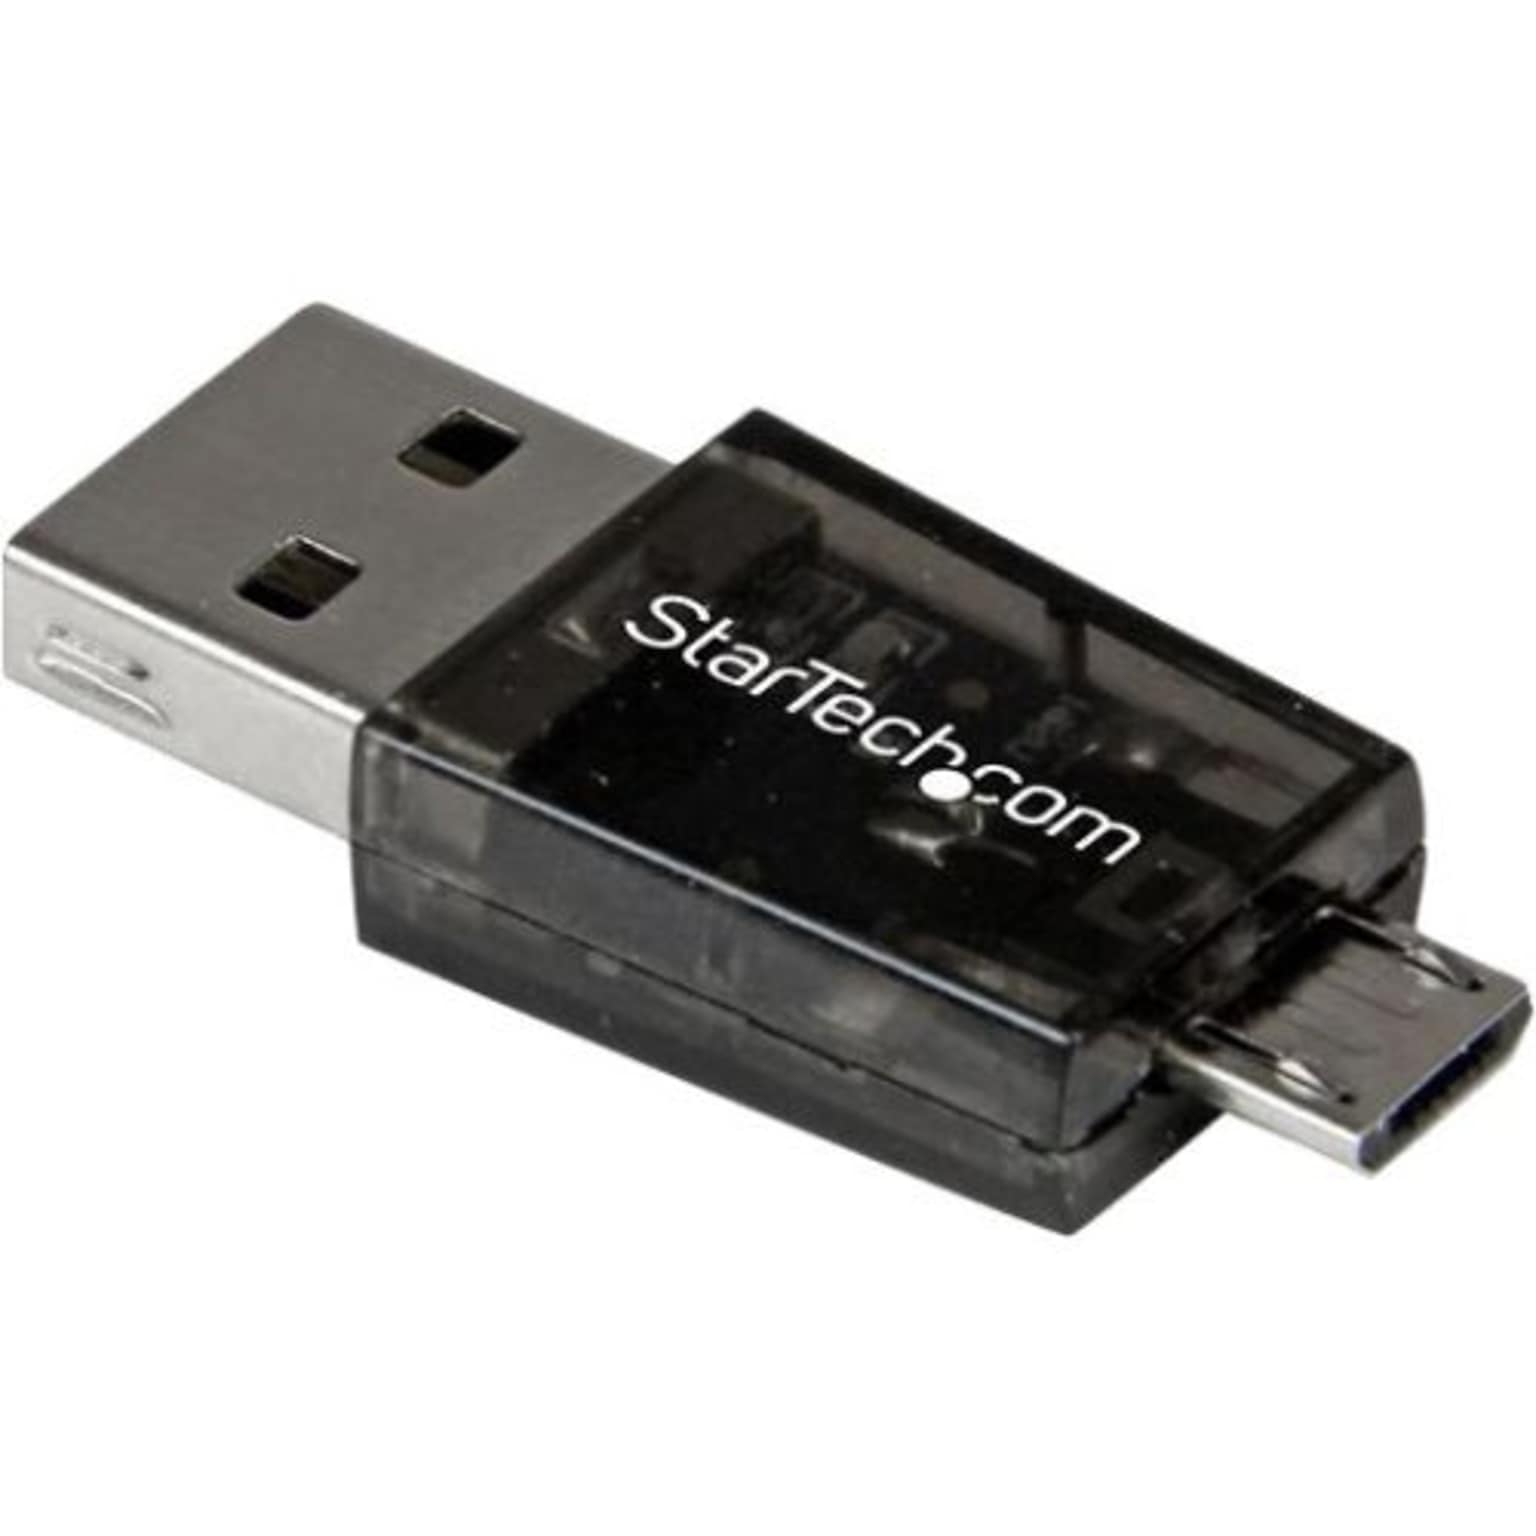 Startech Micro SD to Micro USB/USB OTG Adapter Card Reader For Android Devices